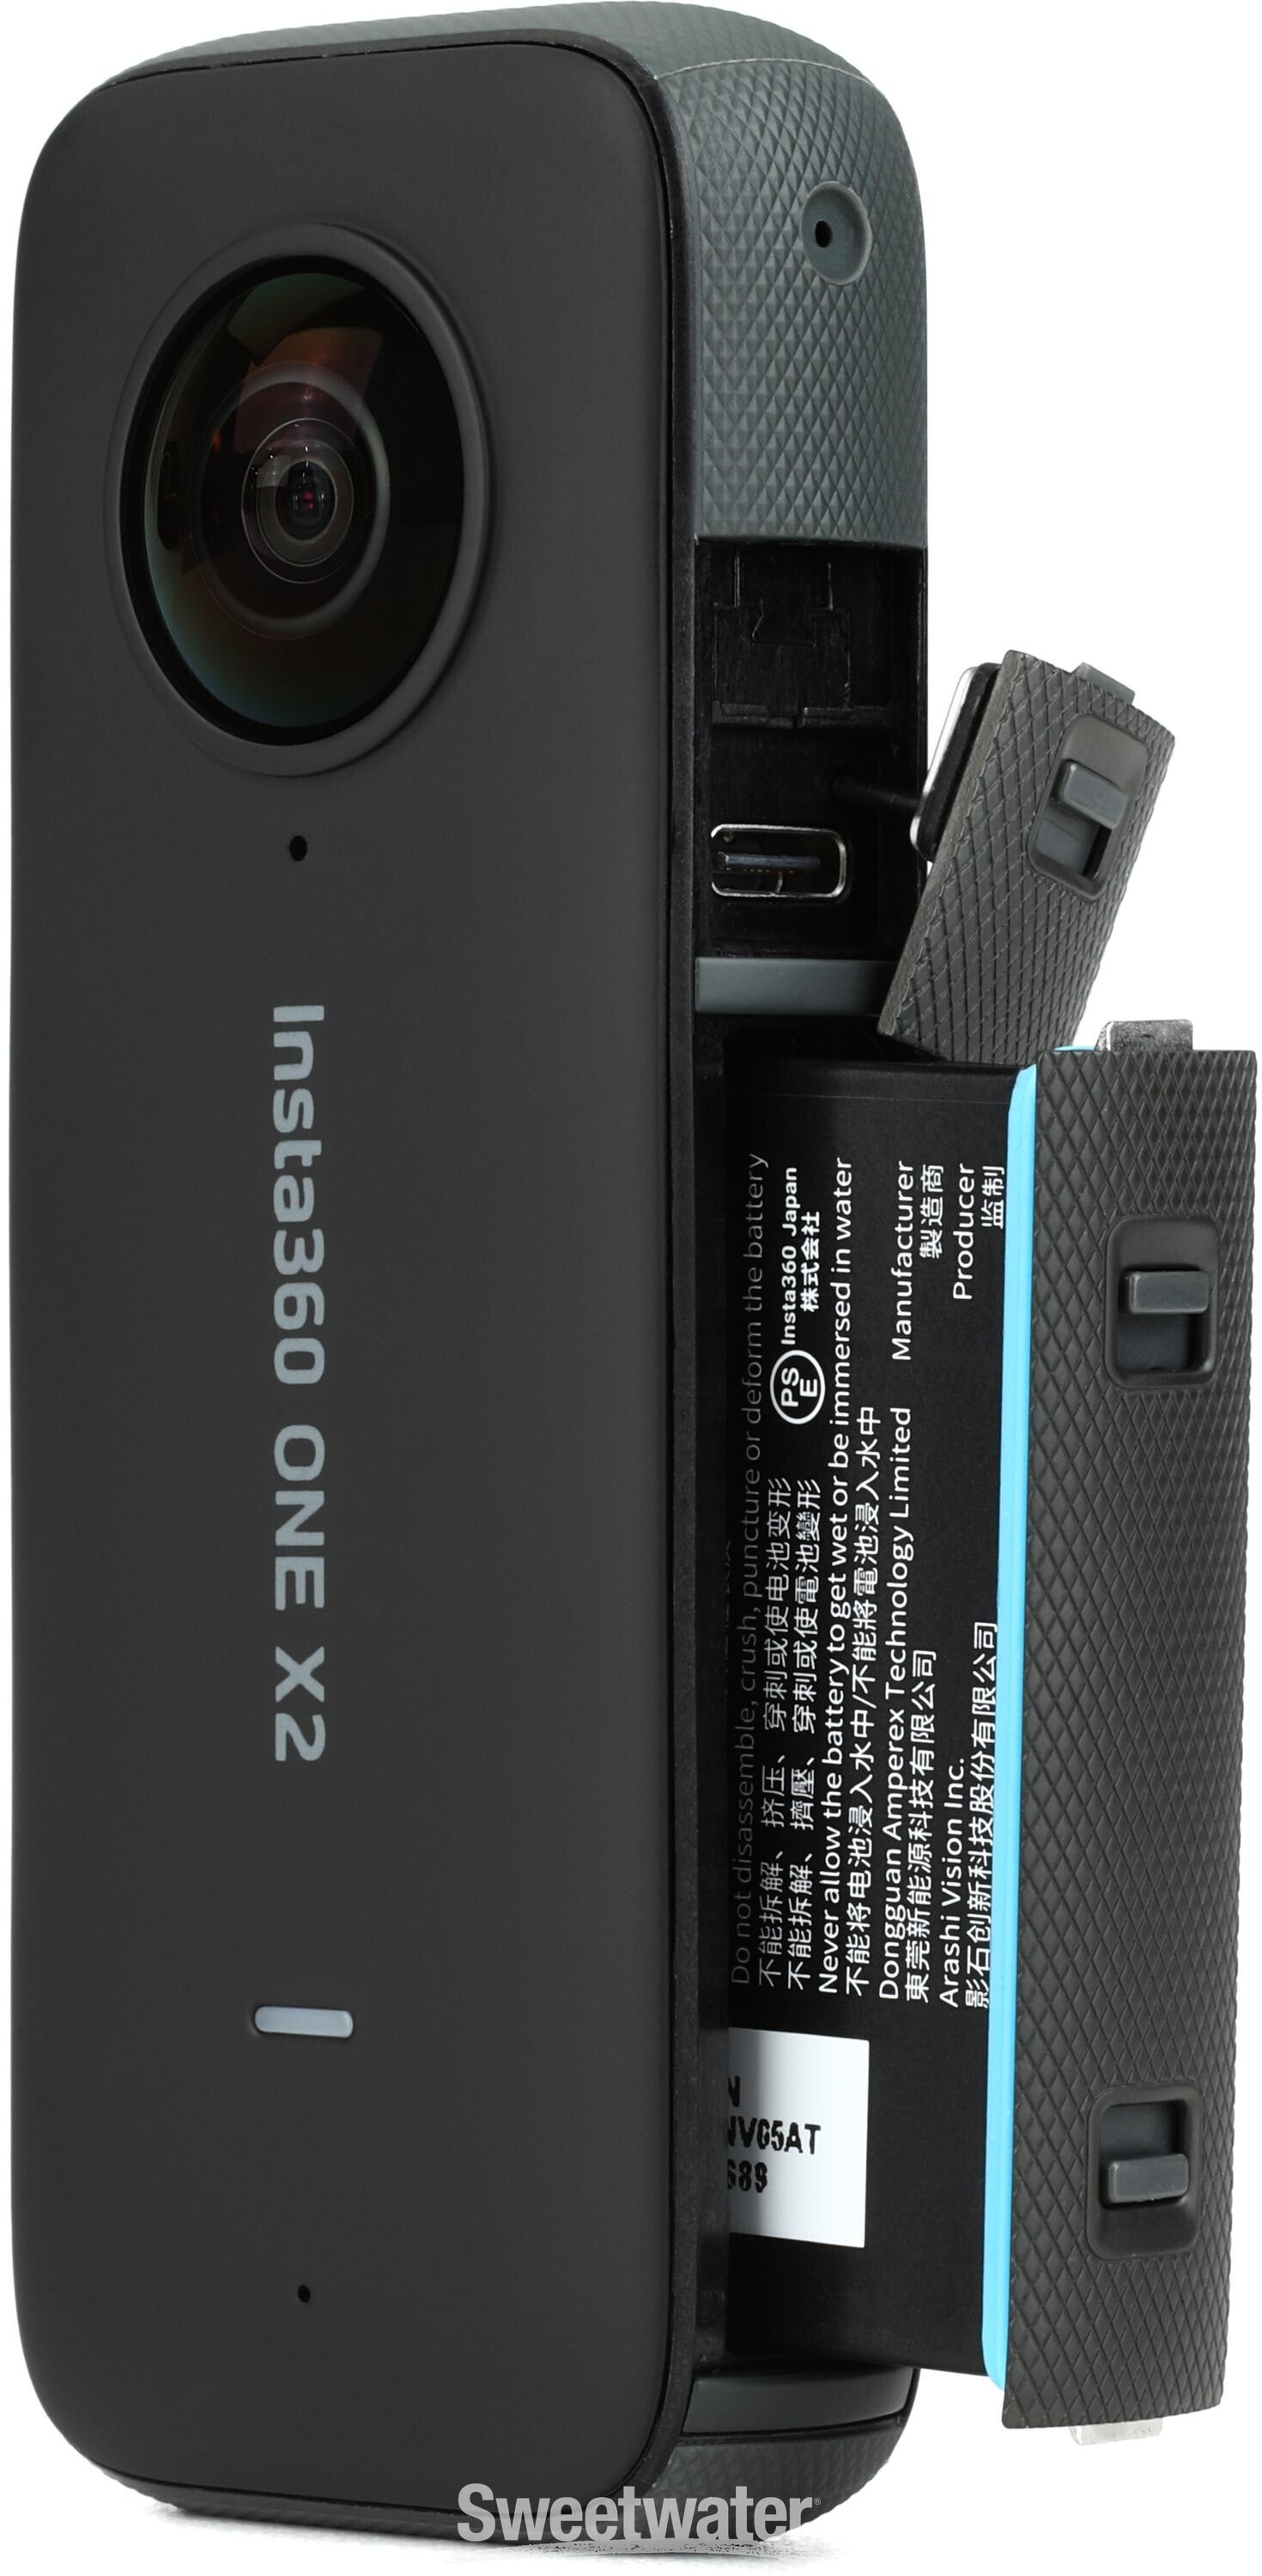 Insta360 ONE X2 Pocket Action Video Camera | Sweetwater